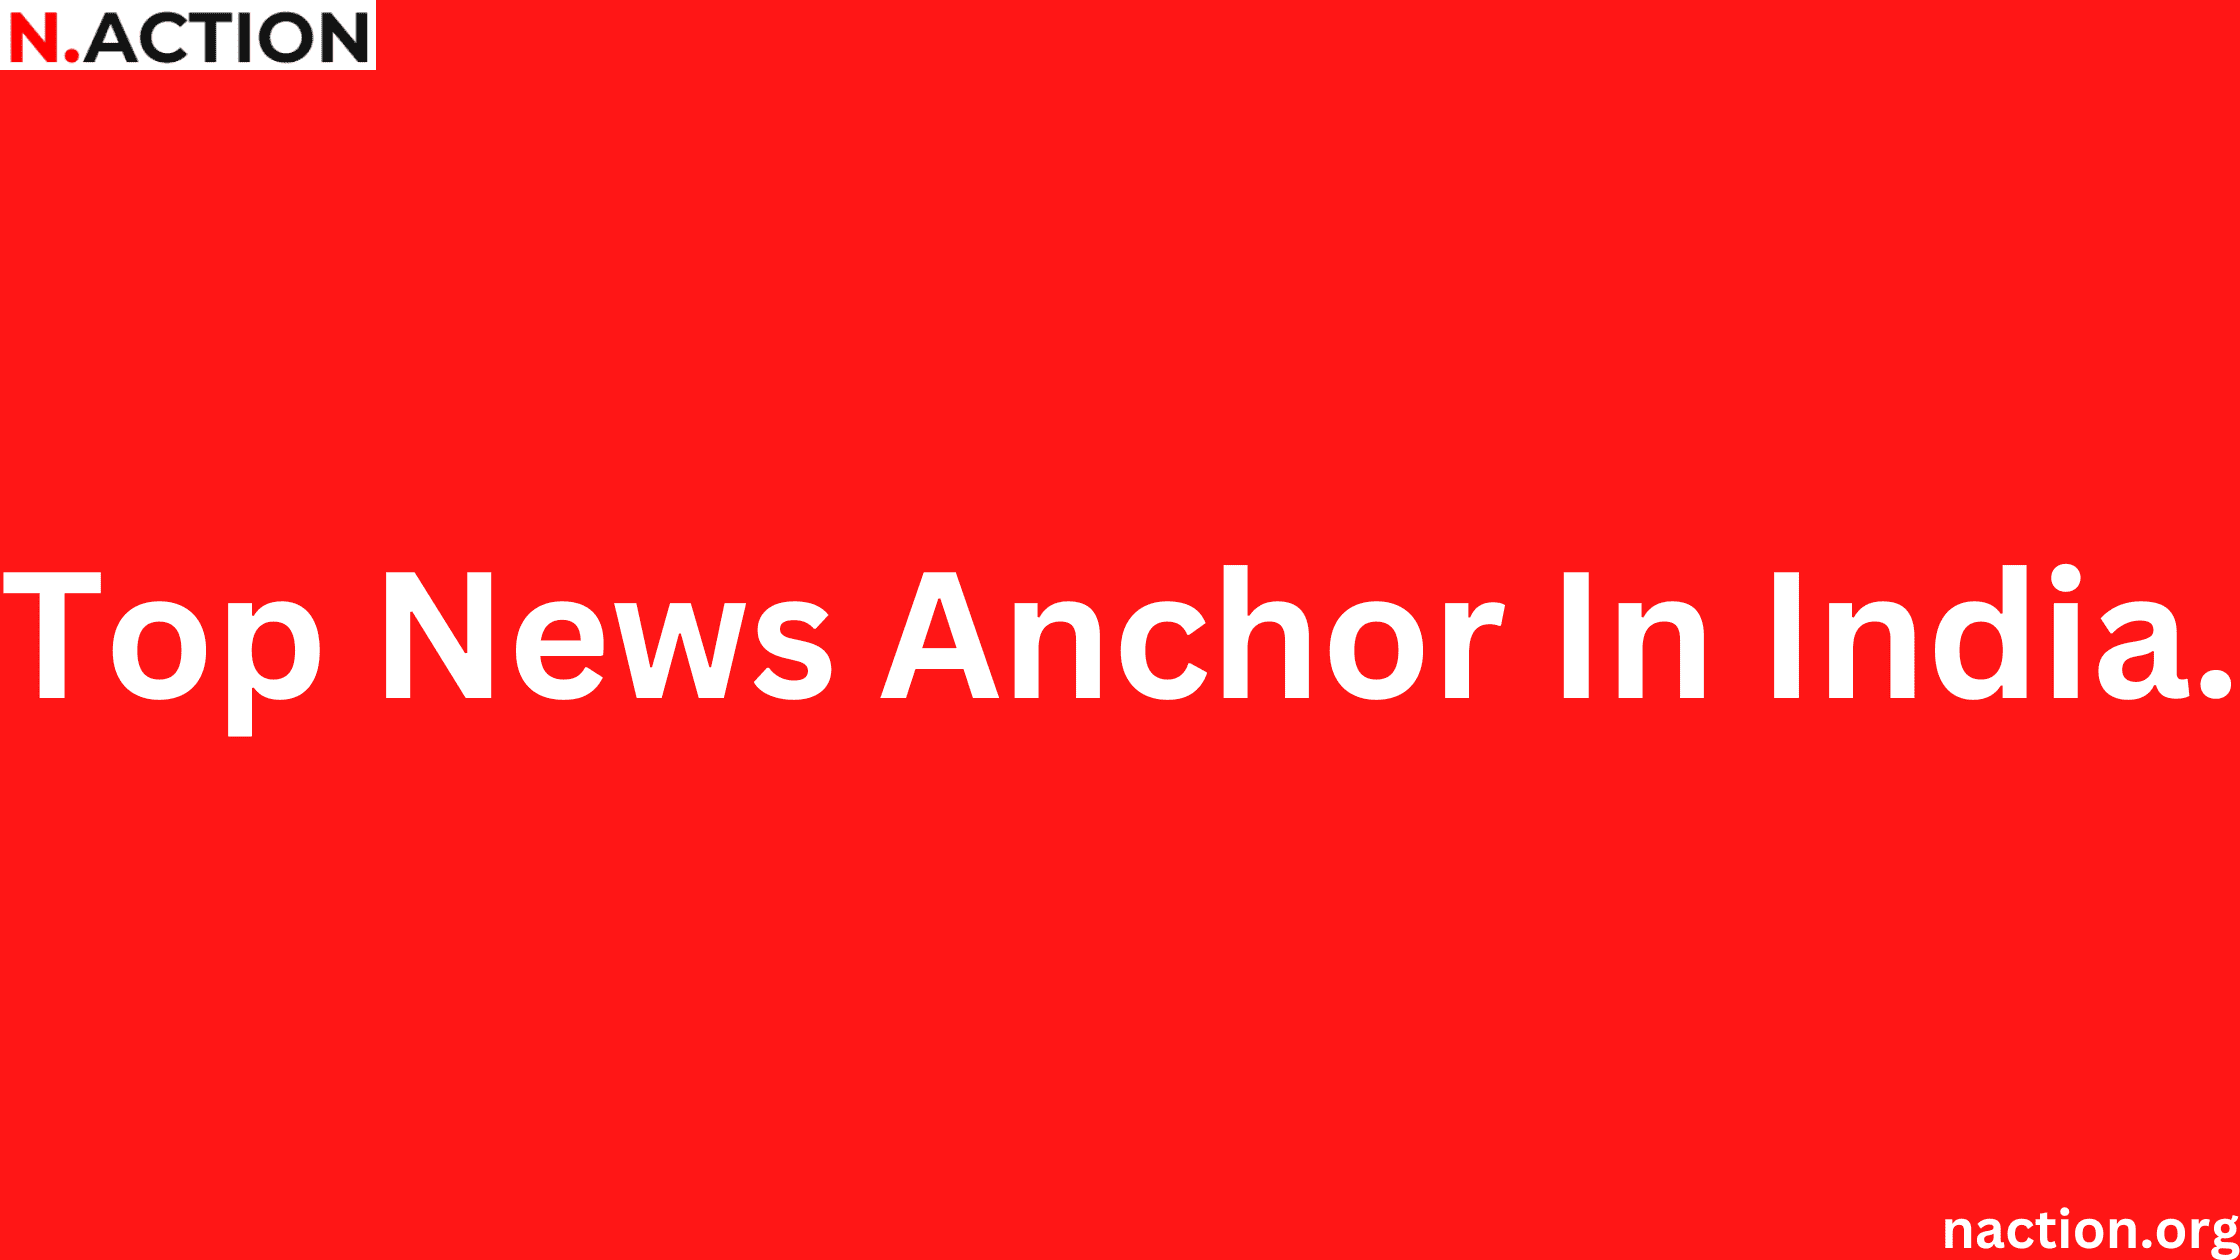 Top News Anchors In India